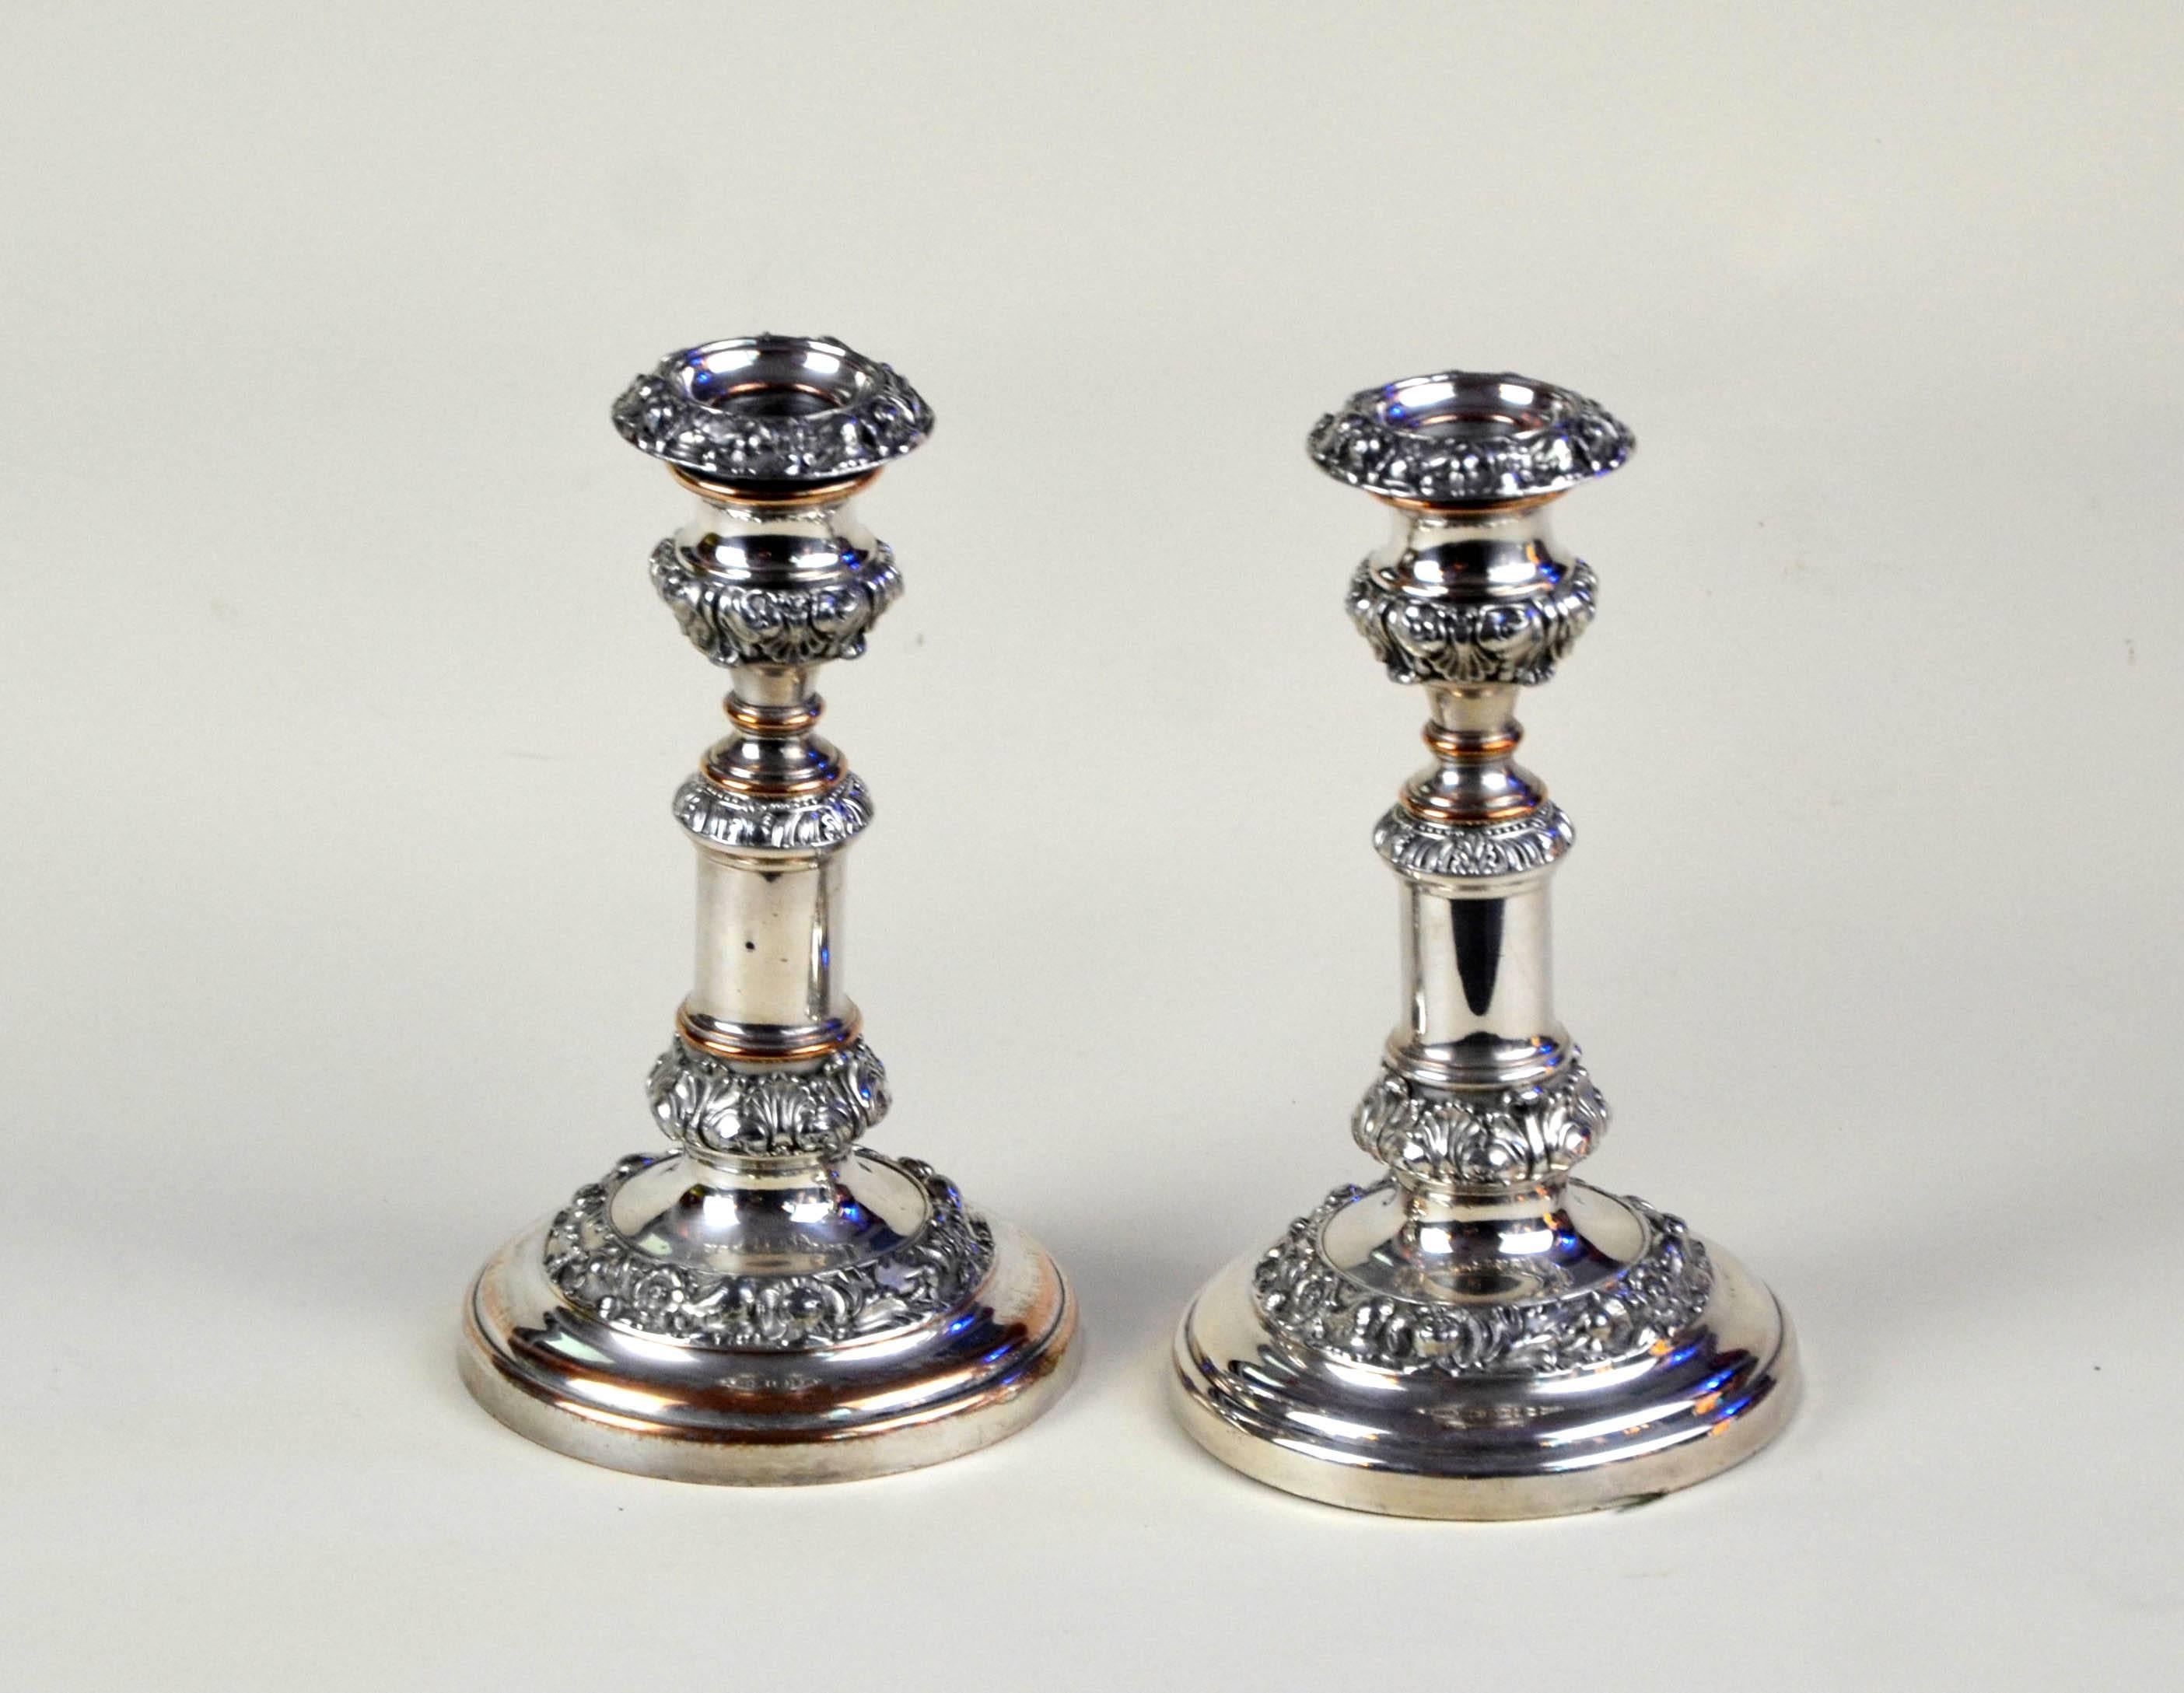 King George IV old Sheffield plate telescopic candlesticks with foliage decorations made in England, circa 1820.

Measure: Diameter 12 cm, height from 21 cm to 26 cm.

Collectors note:

Old Sheffield plate was accidentally invented by Thomas